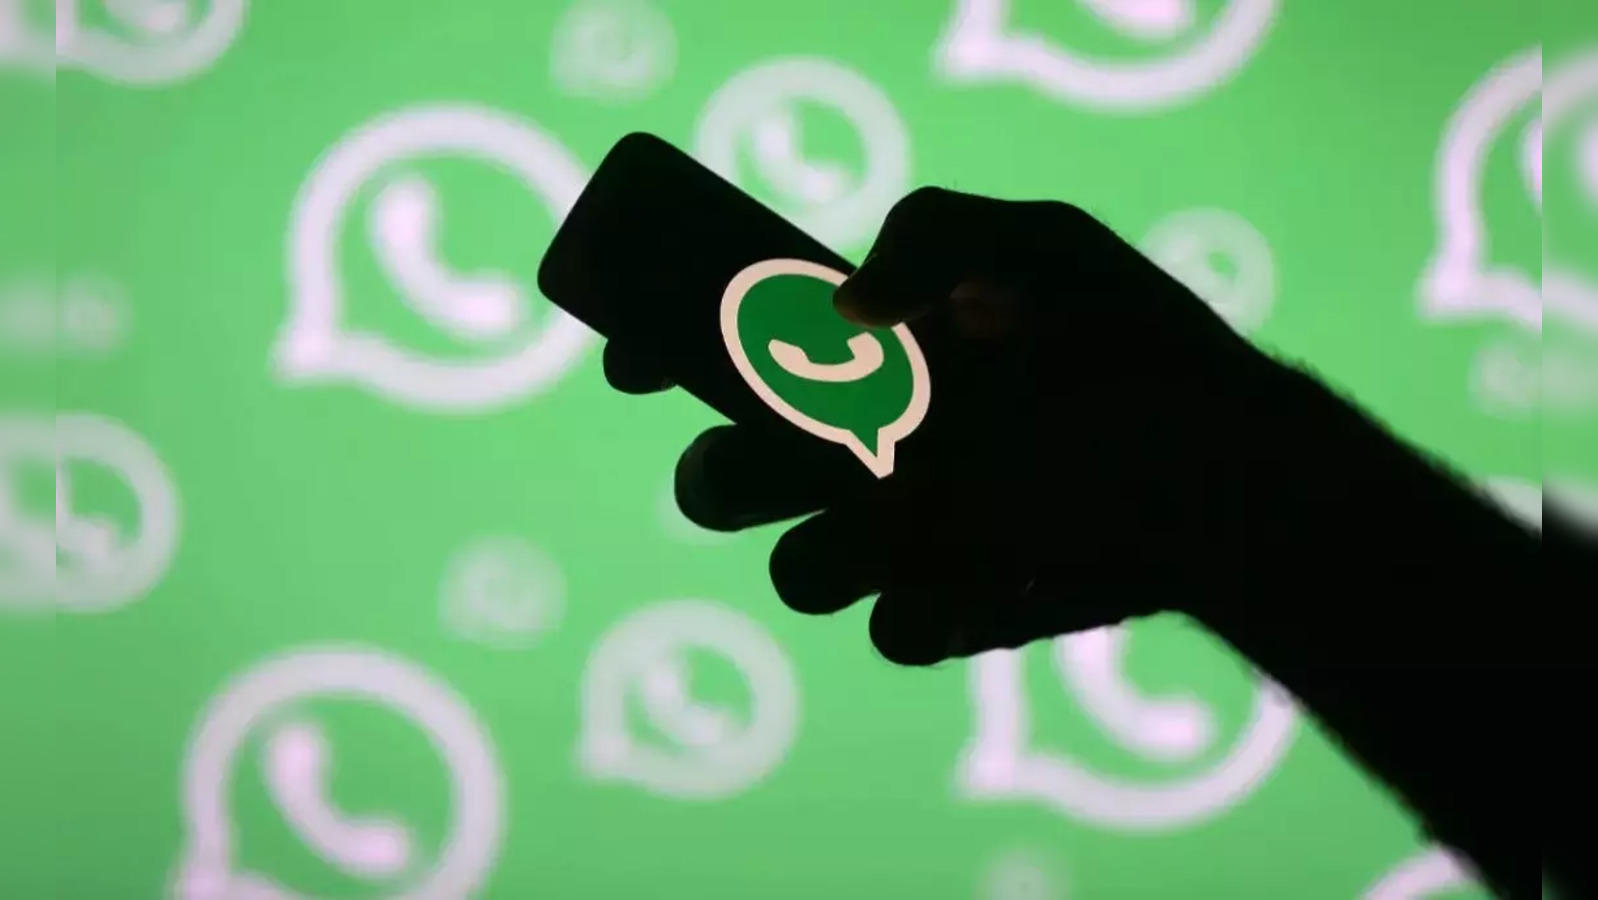 WhatsApp to start showing profile photo of the contact alongside